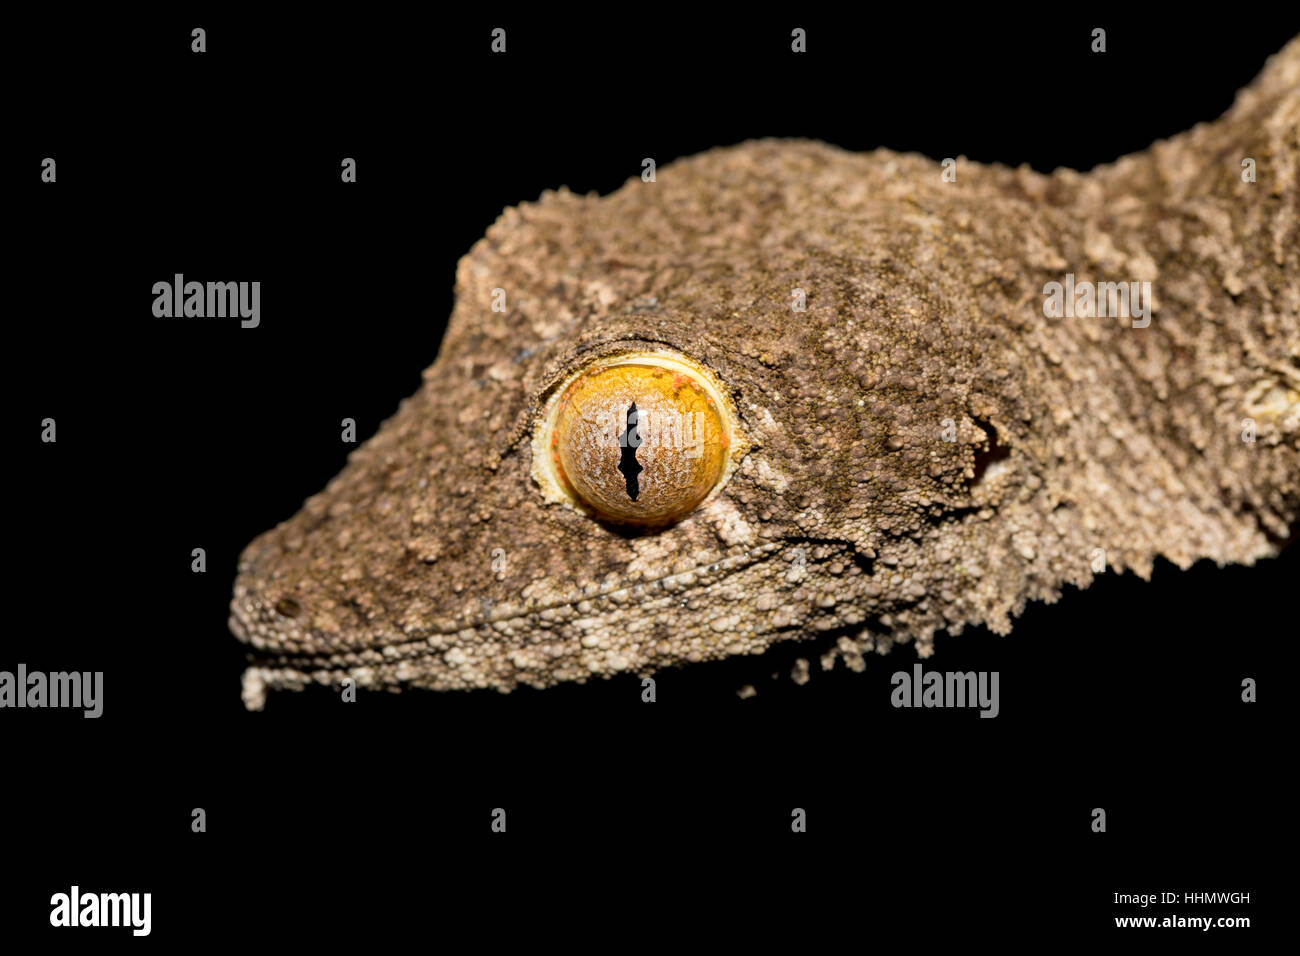 reptile giant leaf-tailed gecko, Uroplatus fimbriatus, Ankarana Special Reserve in northern Madagascar. Endemic animal, nocturnal photo, Madagascar wi Stock Photo